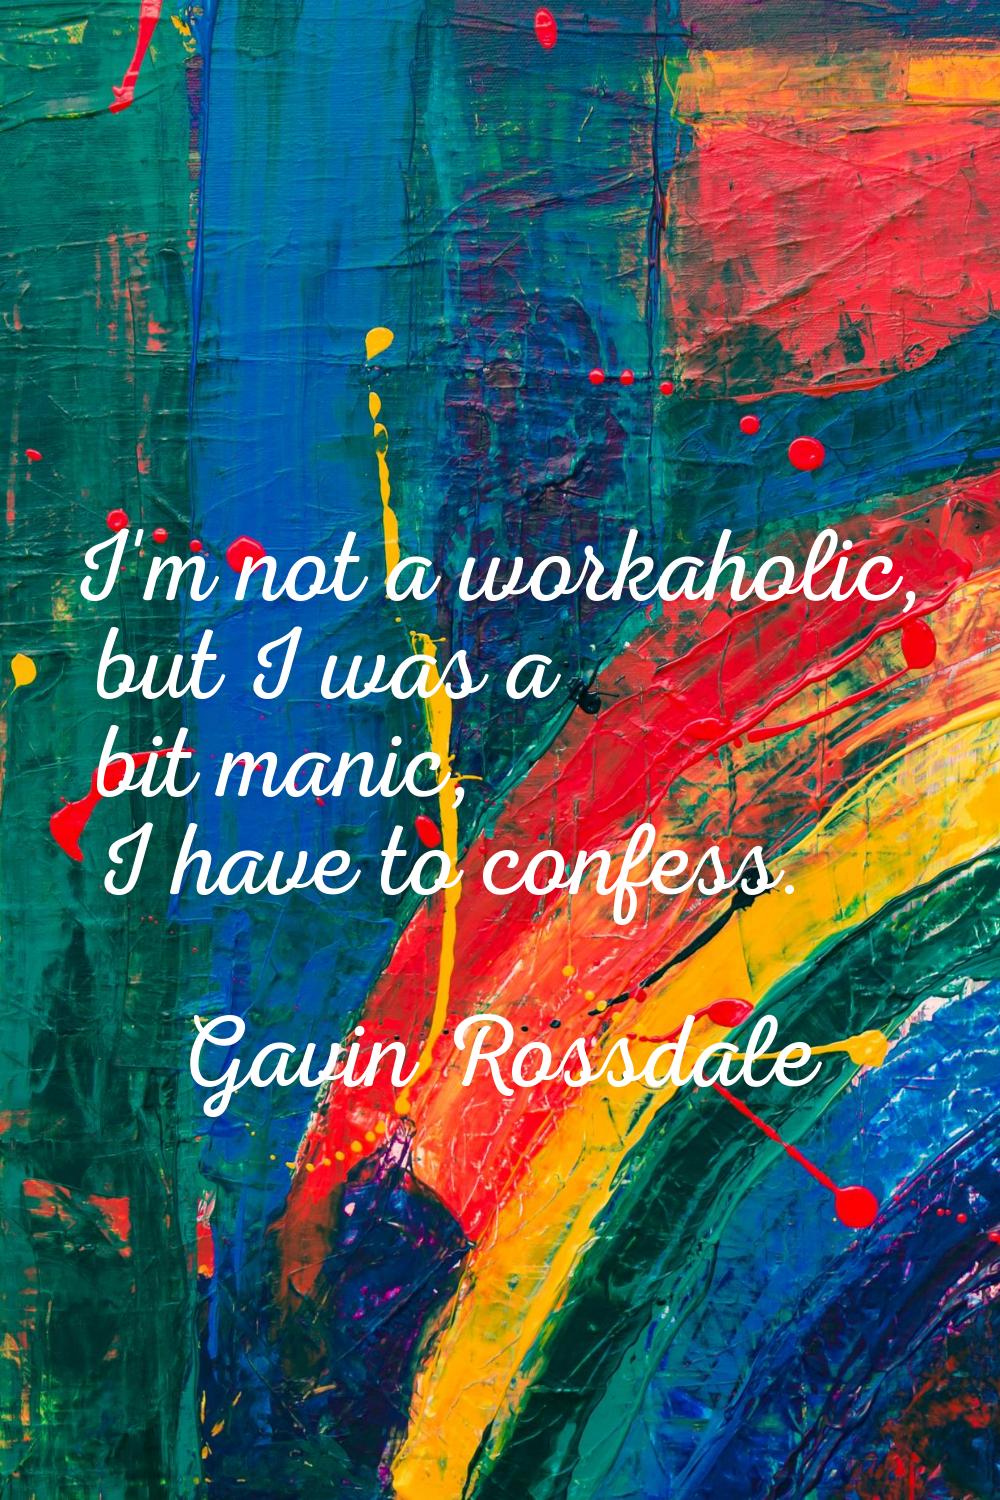 I'm not a workaholic, but I was a bit manic, I have to confess.